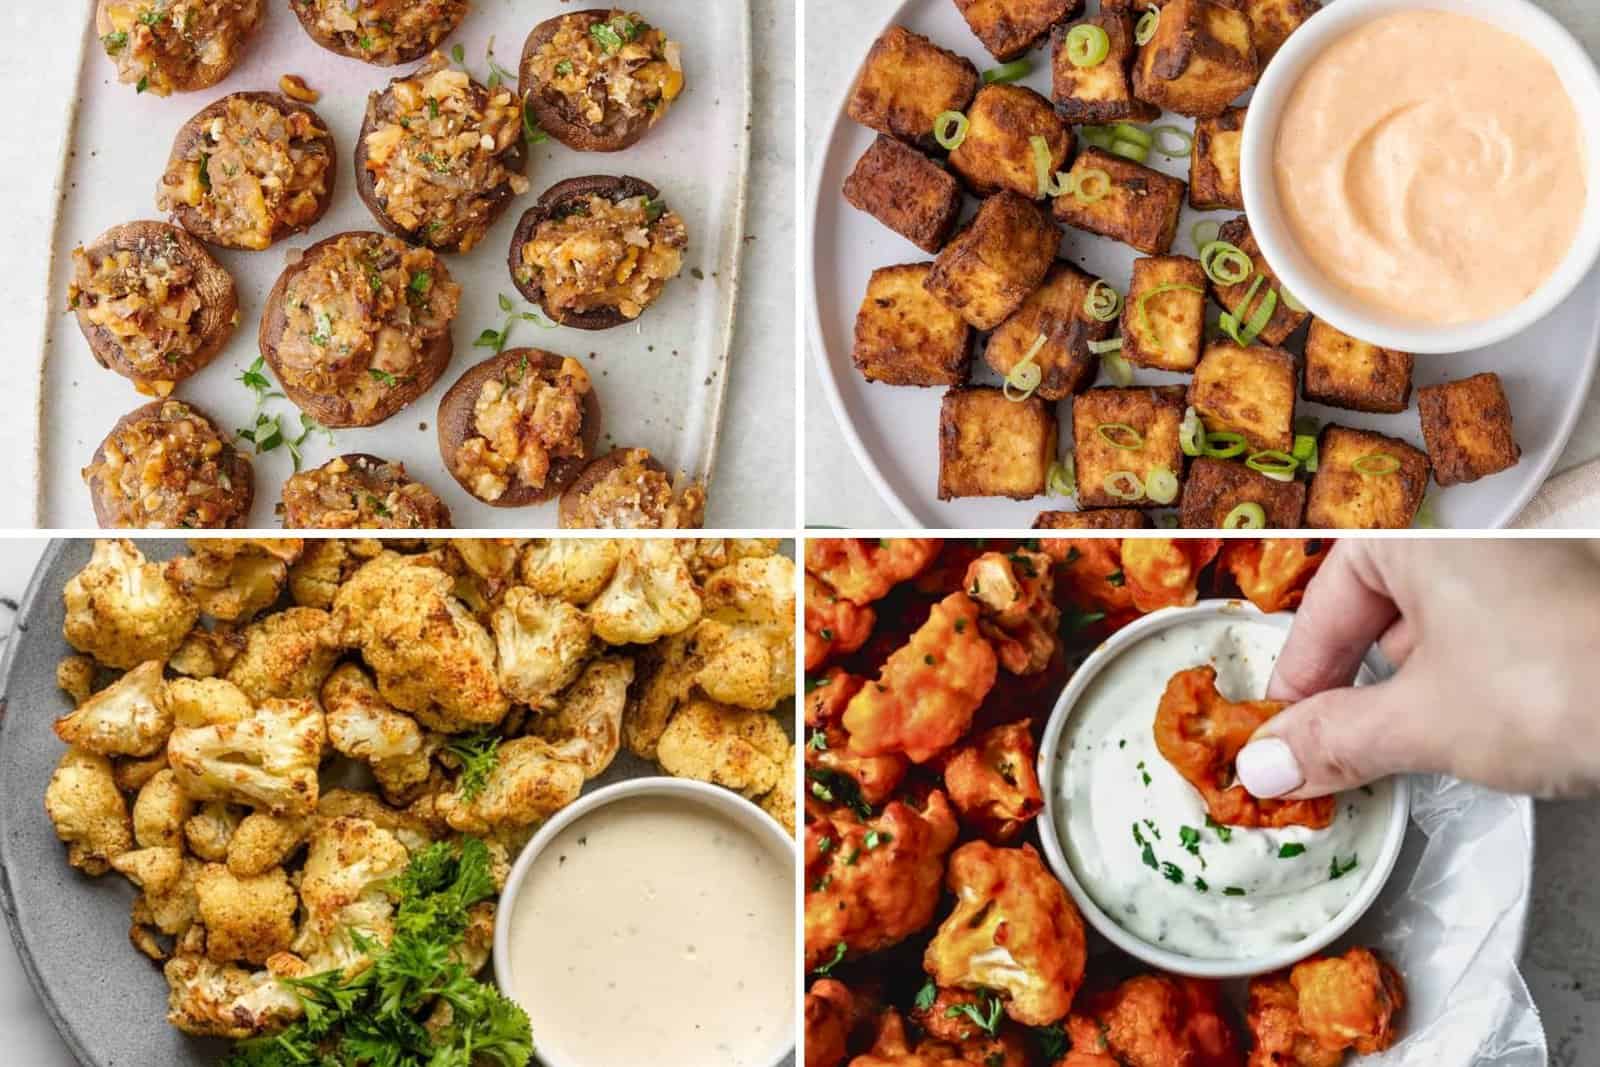 4 image collage of vegetarian snacks and appetizers.